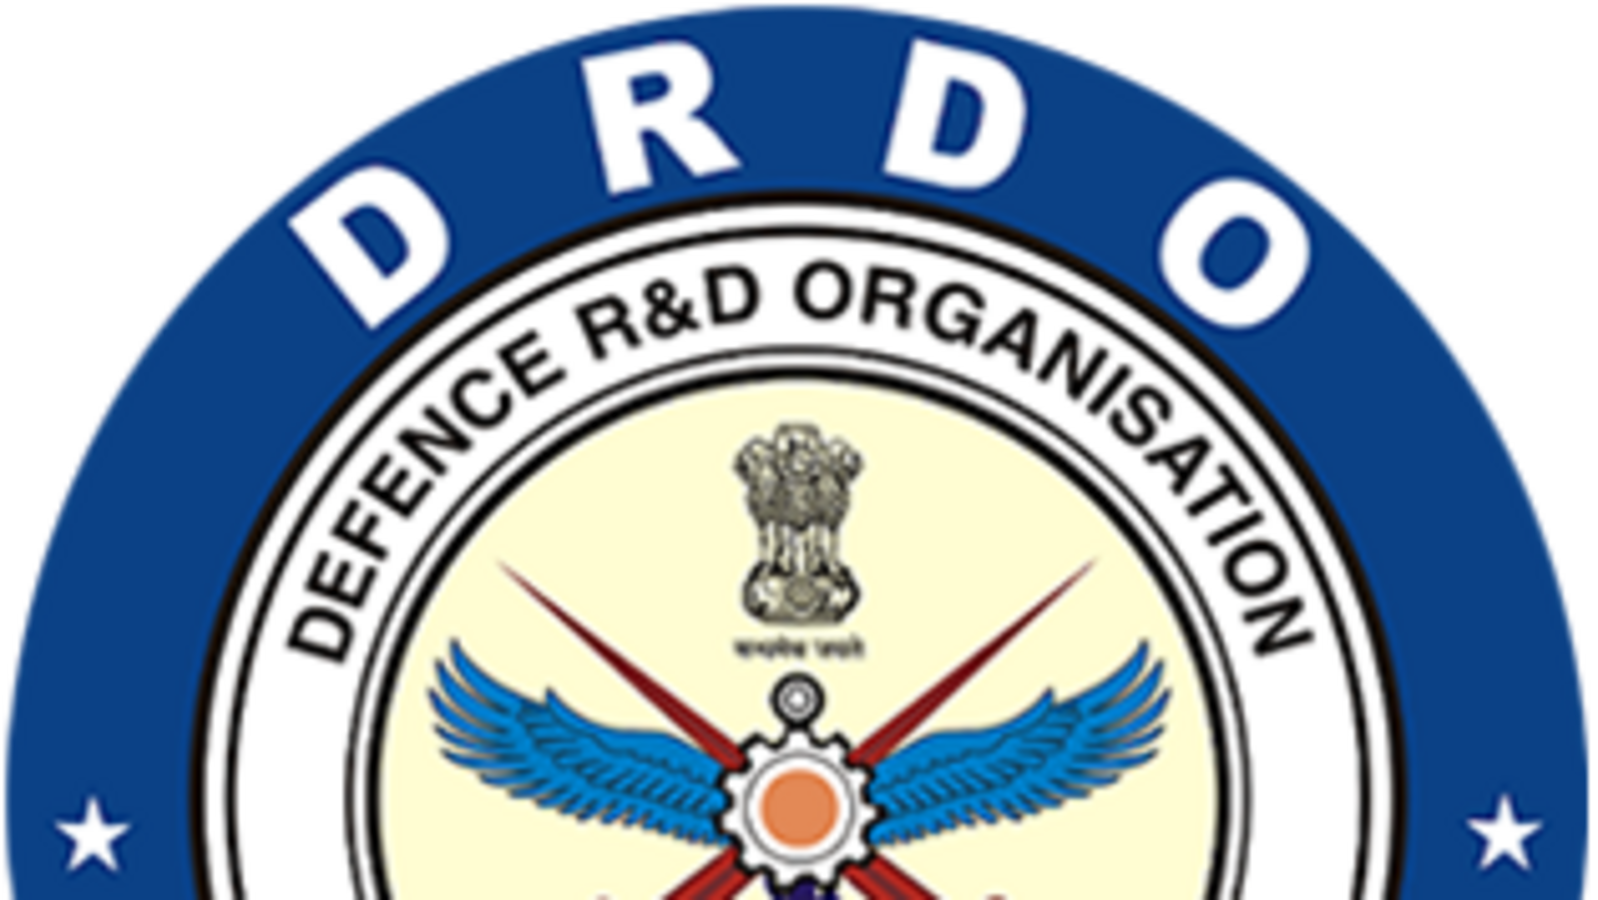 DRDO scientist was attracted to Pak agent & discussed classified defence  projects, charge sheet reveals